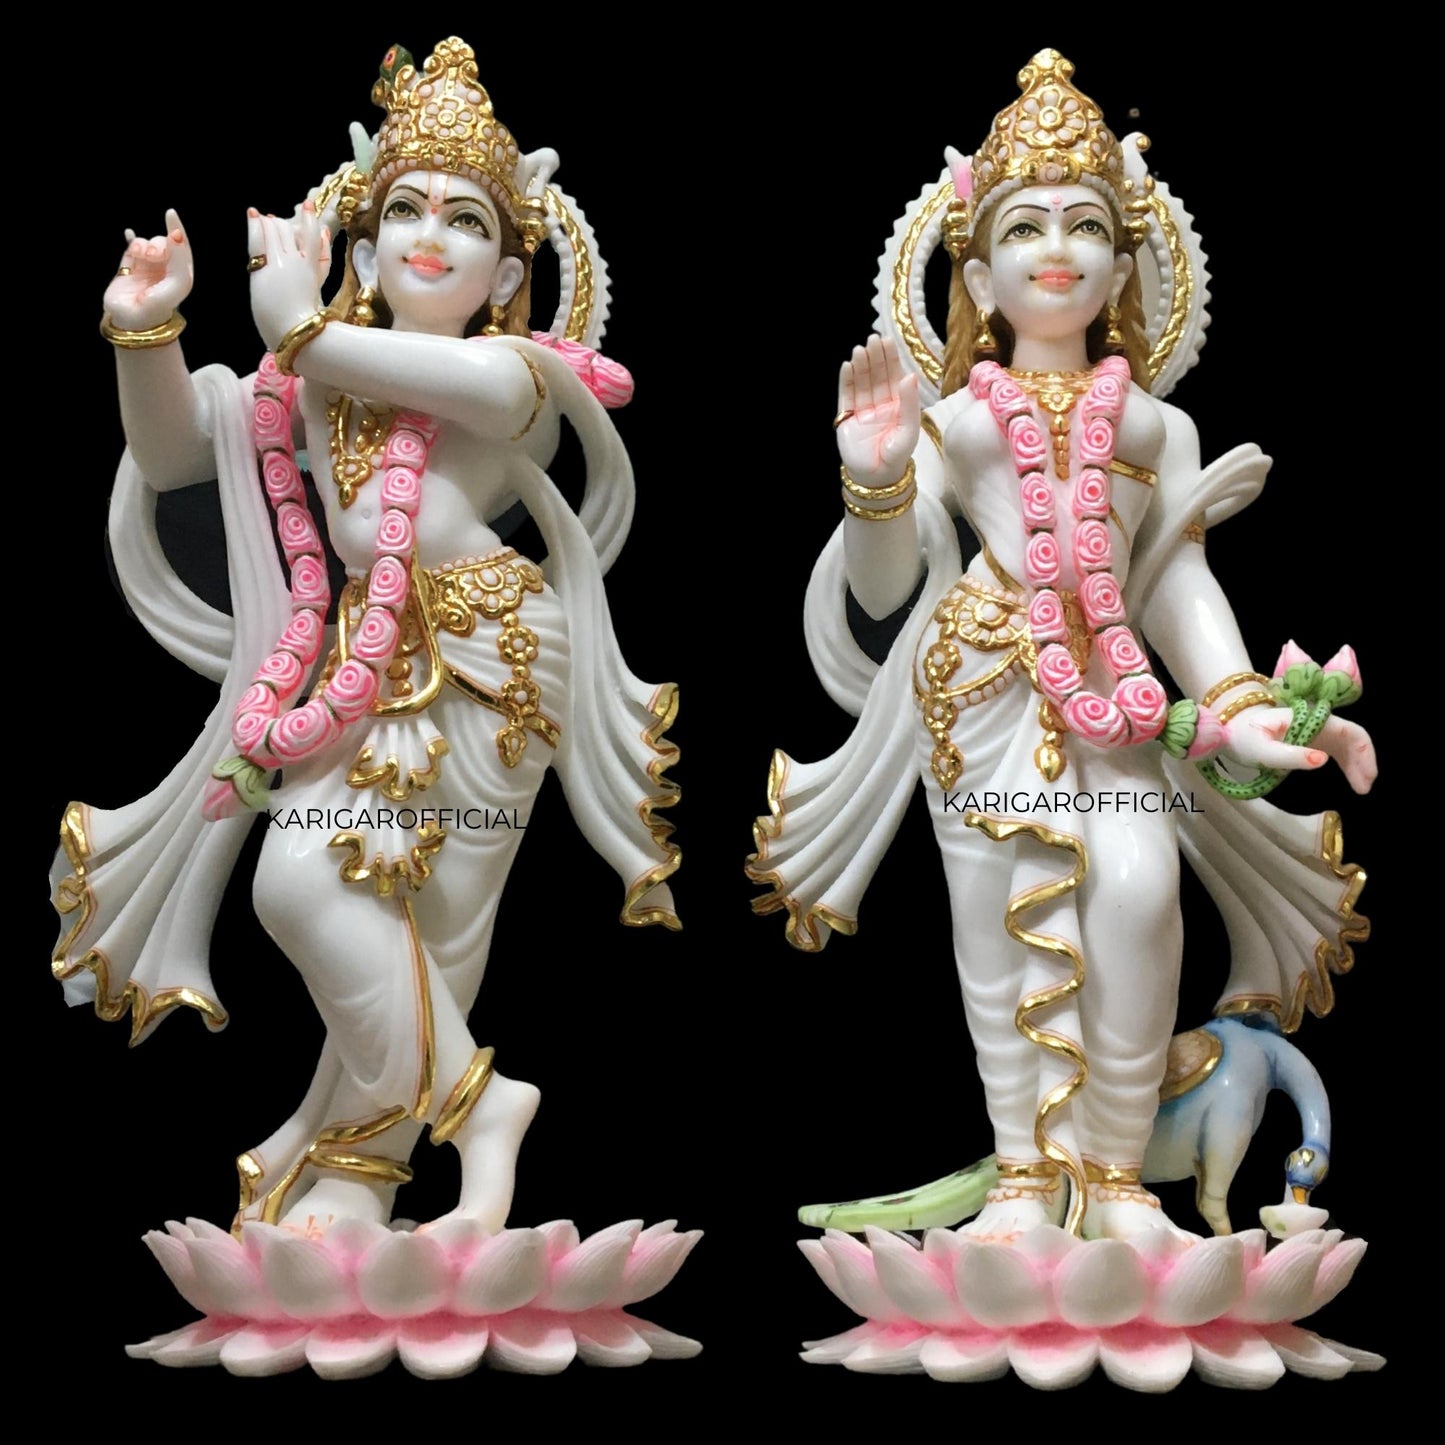 Radha Krishna Statue Standing on Lotus Flowers, Large 24 inches Murti in Gold Leaf Work White Gold Pink Accents Marble Radha Krishna idol, Hindu Divine Couple, Home Temple Wedding Housewarming Gifts